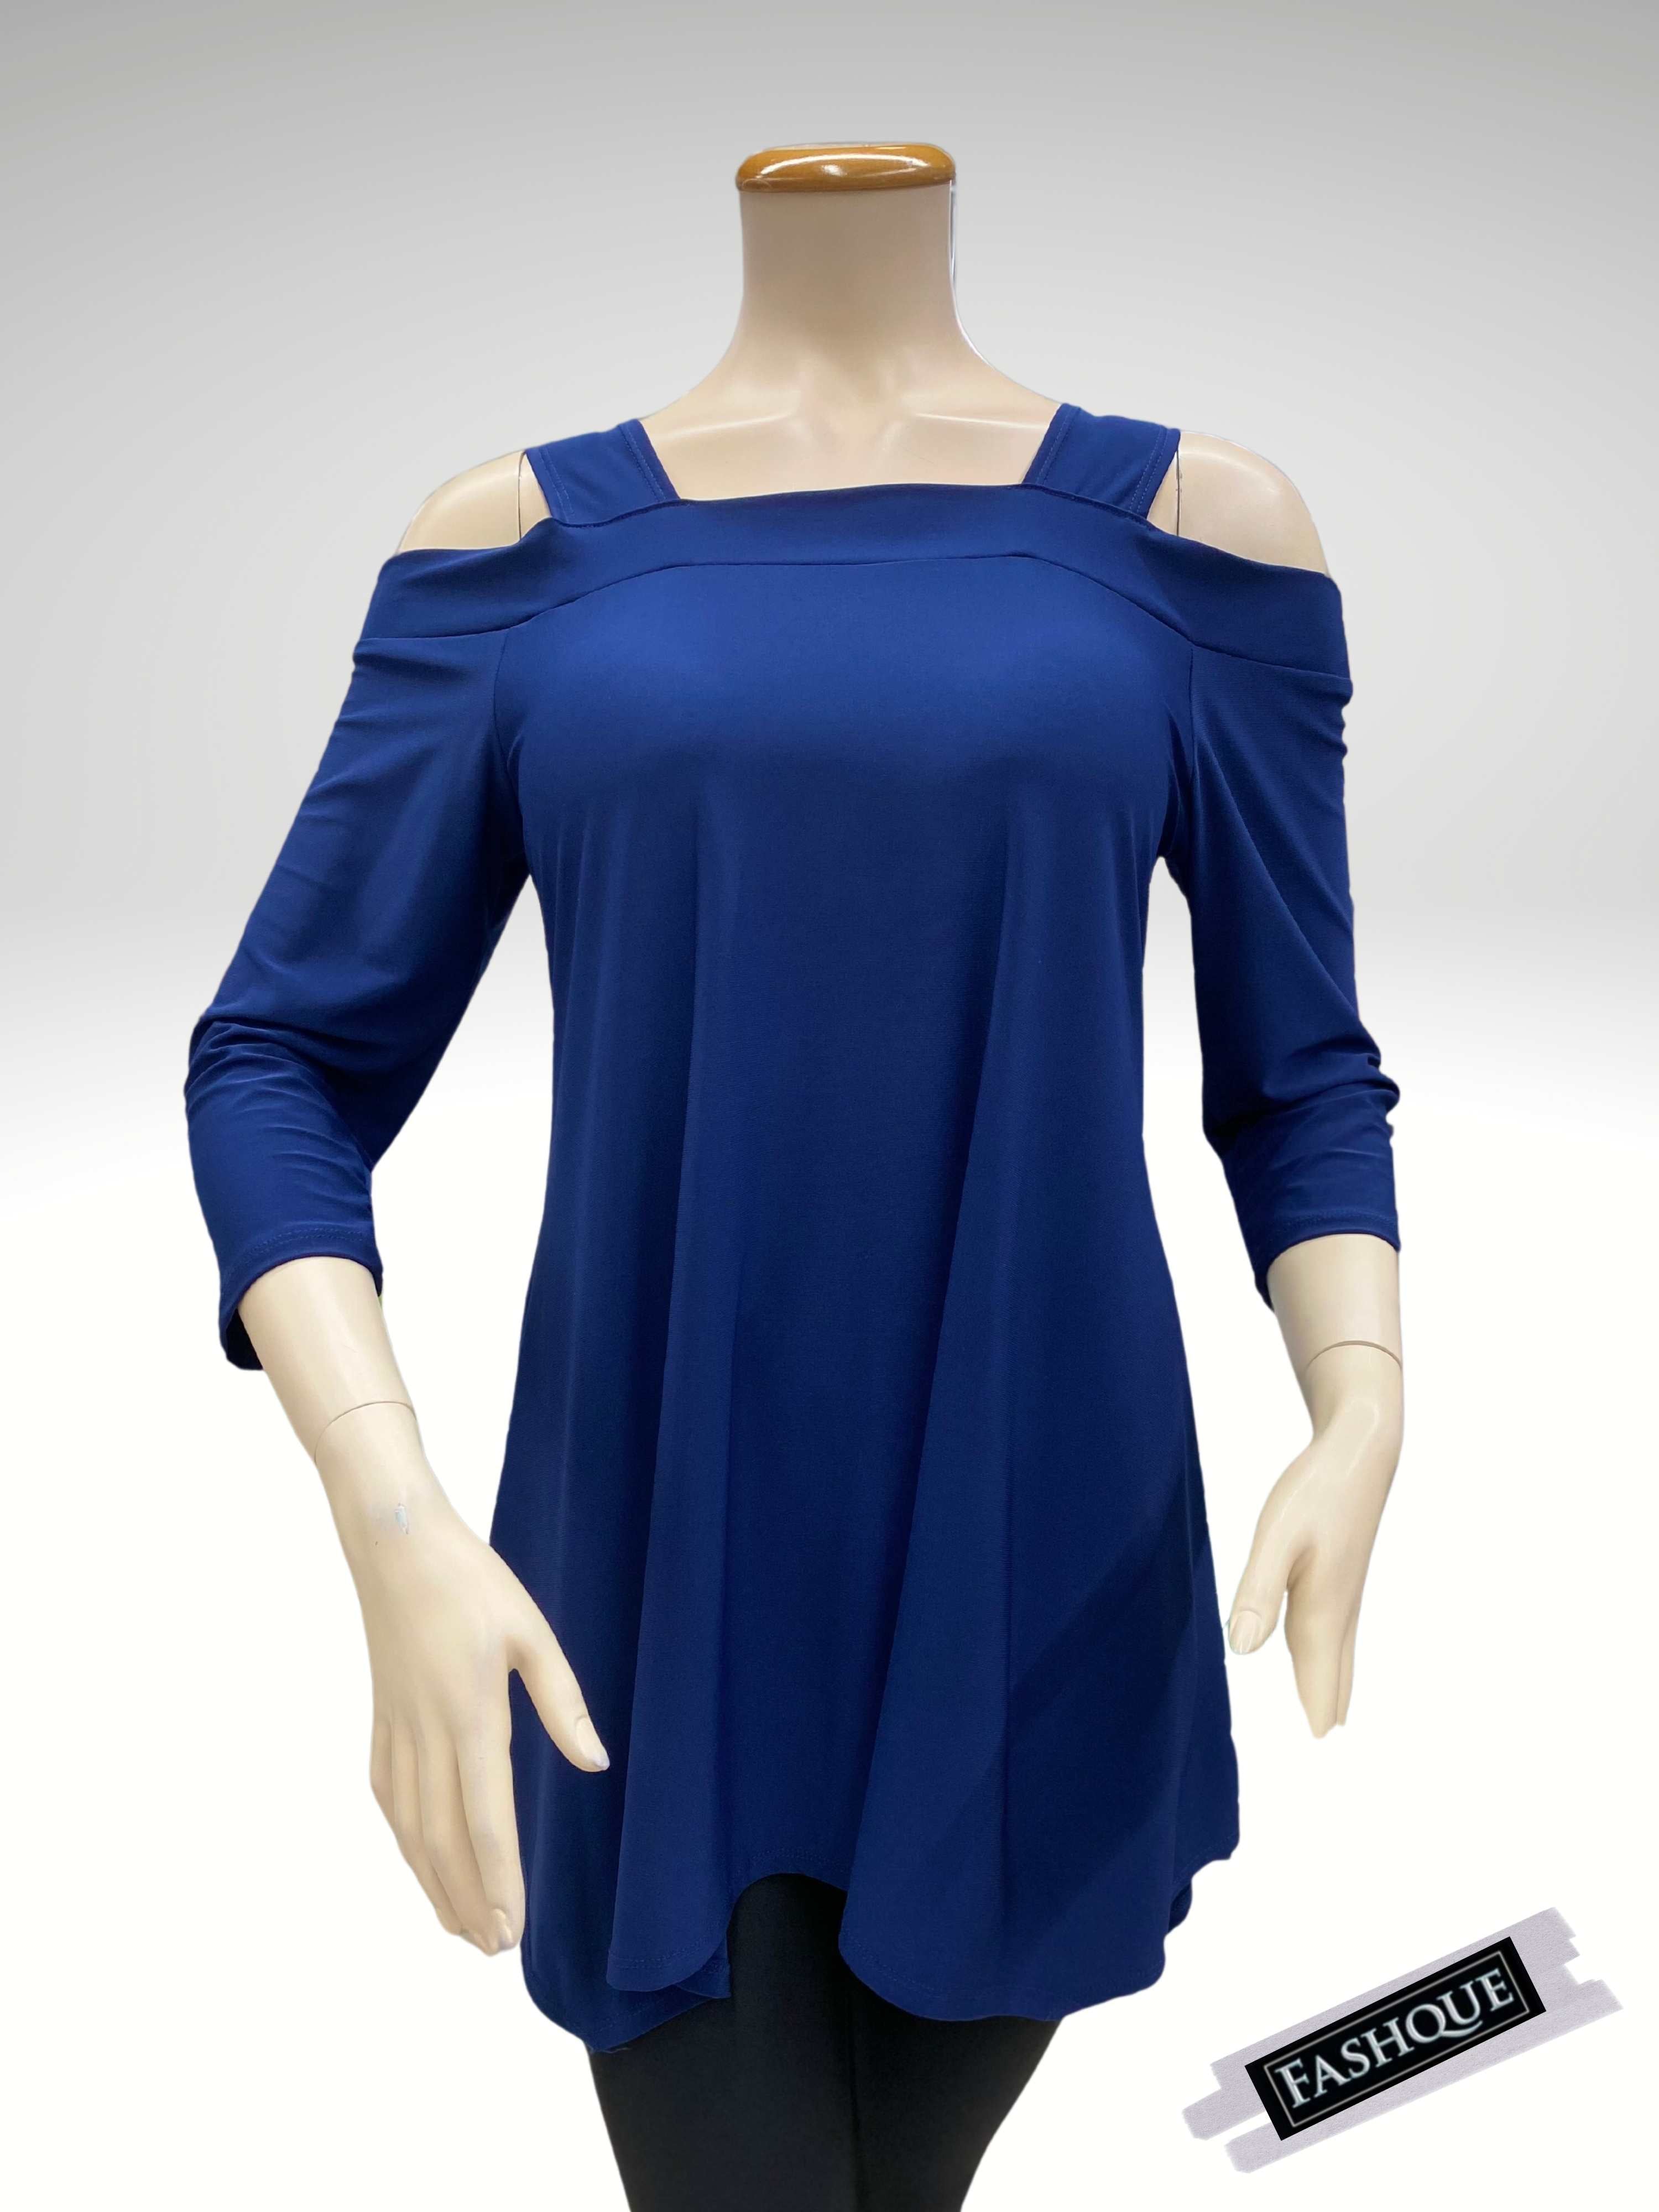 Off shoulder 3/4 sleeve Asymmetrical Tunic/Top - T425